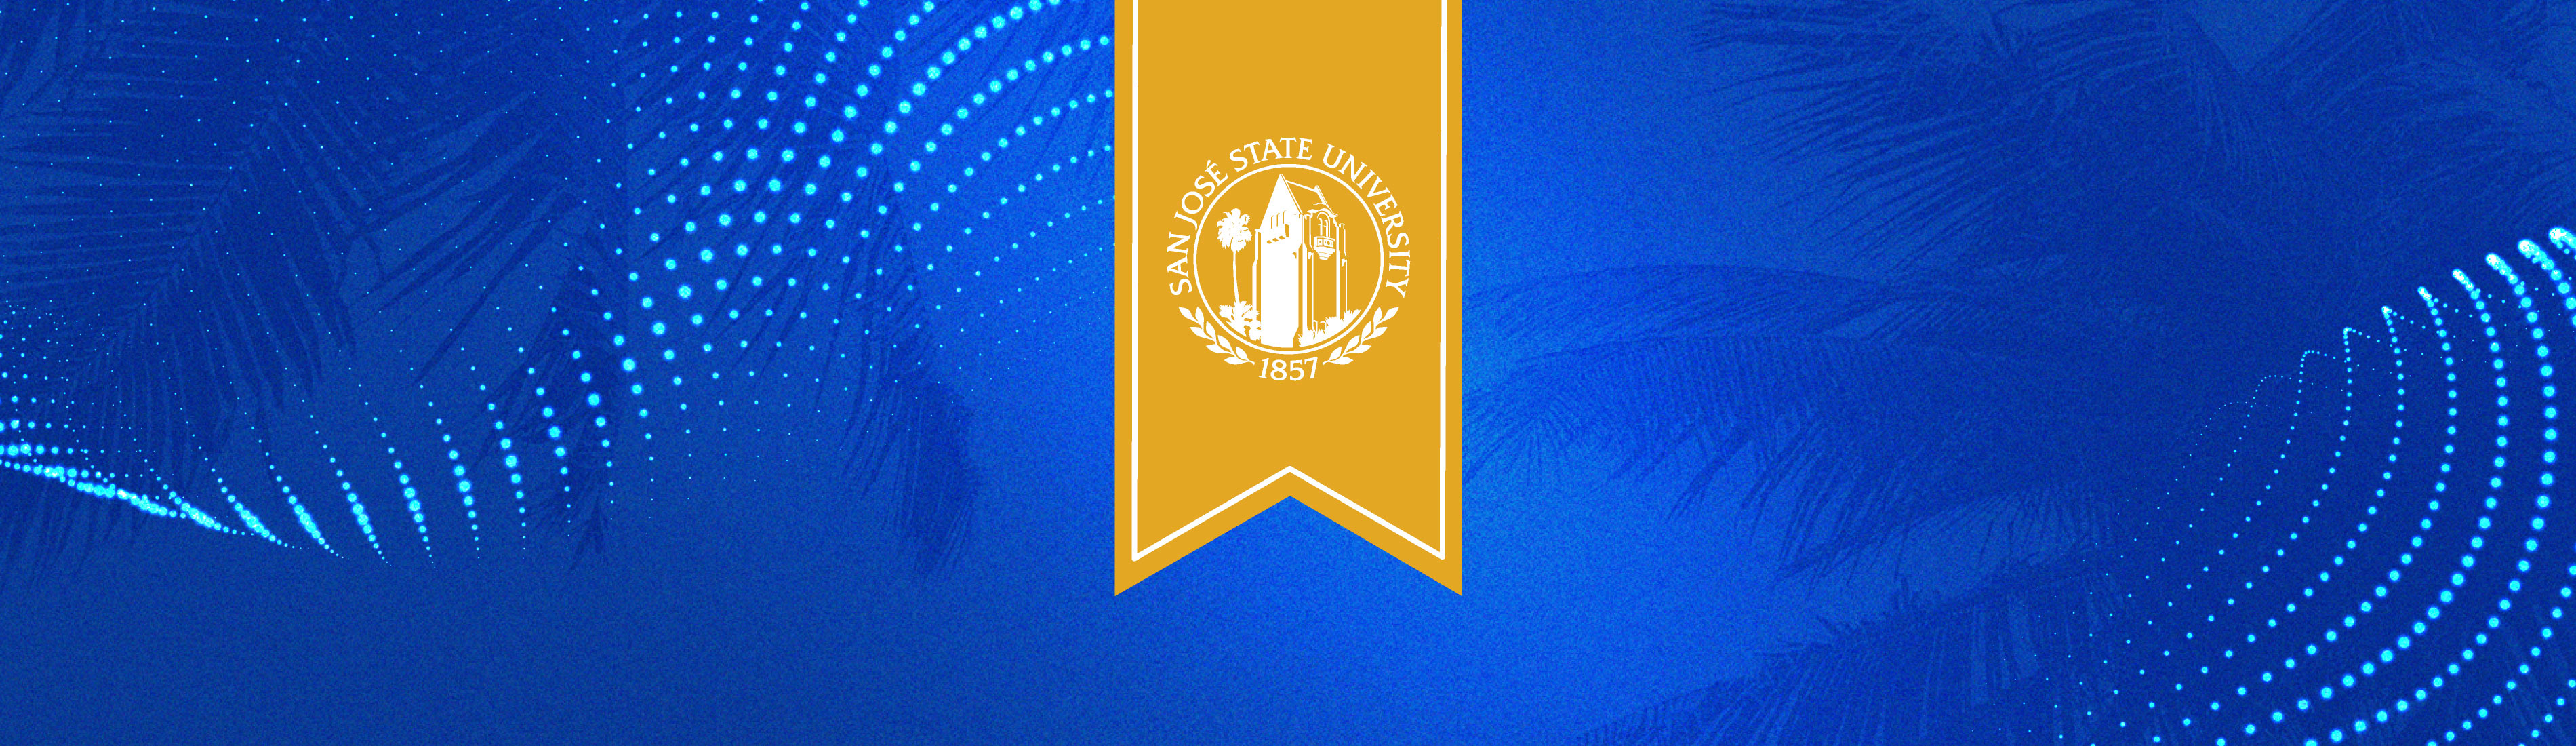 A gold banner with the SJSU seal over a vibrant blue background with teal ribbons of dots and shadows of palm trees.